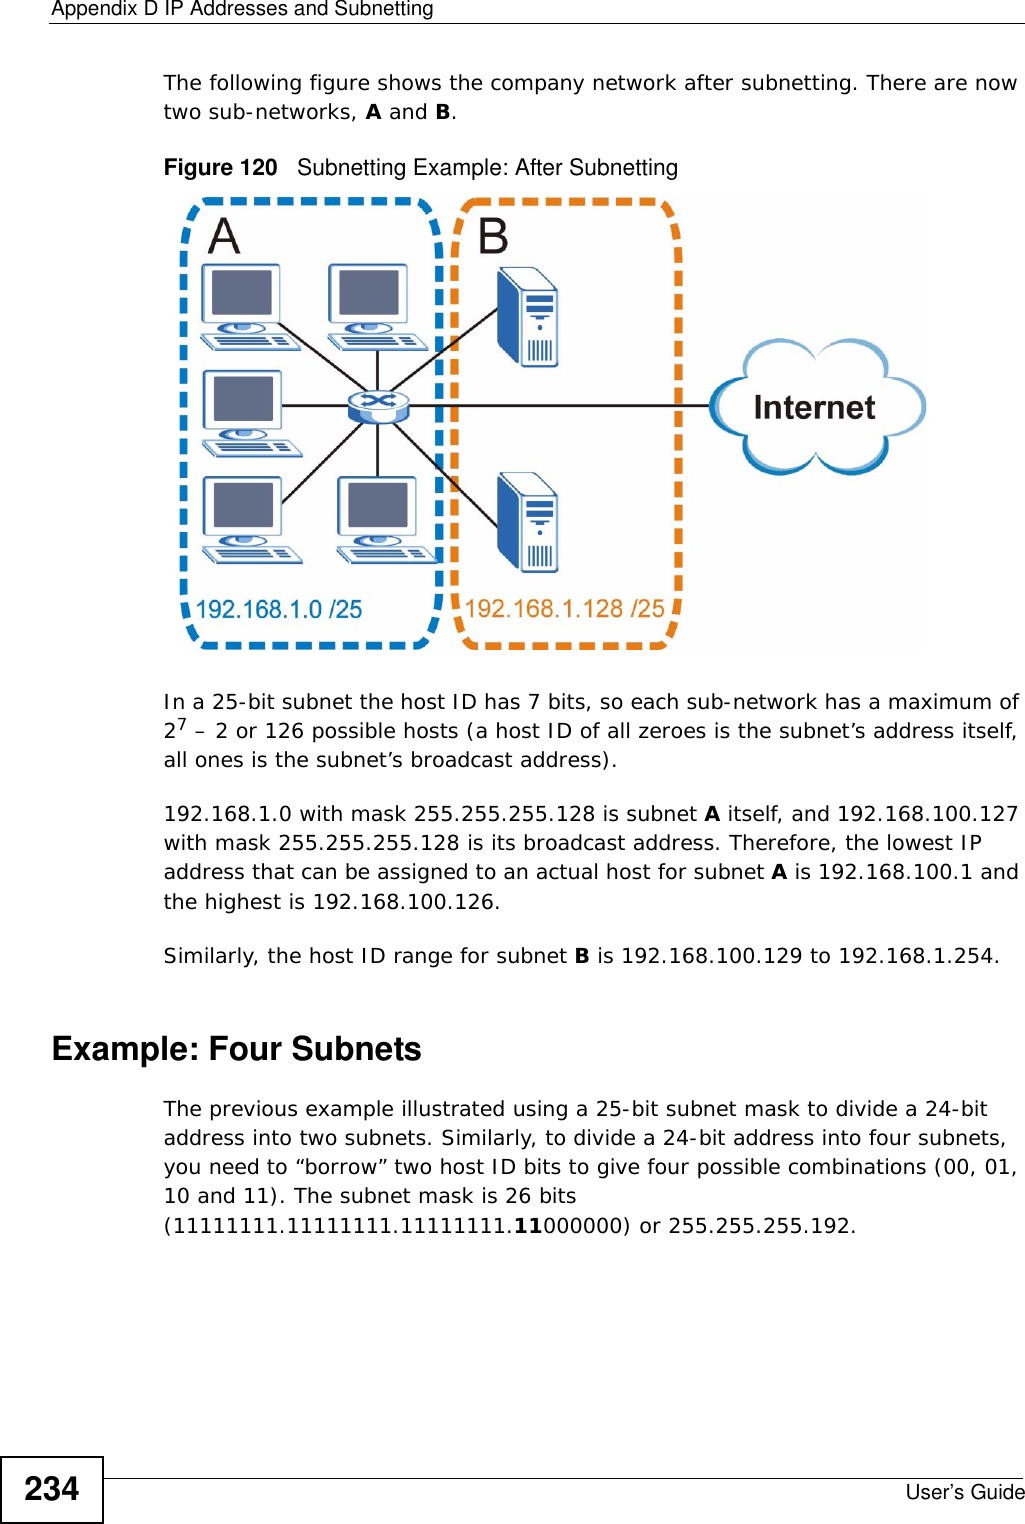 Appendix D IP Addresses and SubnettingUser’s Guide234The following figure shows the company network after subnetting. There are now two sub-networks, A and B. Figure 120   Subnetting Example: After SubnettingIn a 25-bit subnet the host ID has 7 bits, so each sub-network has a maximum of 27 – 2 or 126 possible hosts (a host ID of all zeroes is the subnet’s address itself, all ones is the subnet’s broadcast address).192.168.1.0 with mask 255.255.255.128 is subnet A itself, and 192.168.100.127 with mask 255.255.255.128 is its broadcast address. Therefore, the lowest IP address that can be assigned to an actual host for subnet A is 192.168.100.1 and the highest is 192.168.100.126. Similarly, the host ID range for subnet B is 192.168.100.129 to 192.168.1.254.Example: Four Subnets The previous example illustrated using a 25-bit subnet mask to divide a 24-bit address into two subnets. Similarly, to divide a 24-bit address into four subnets, you need to “borrow” two host ID bits to give four possible combinations (00, 01, 10 and 11). The subnet mask is 26 bits (11111111.11111111.11111111.11000000) or 255.255.255.192. 